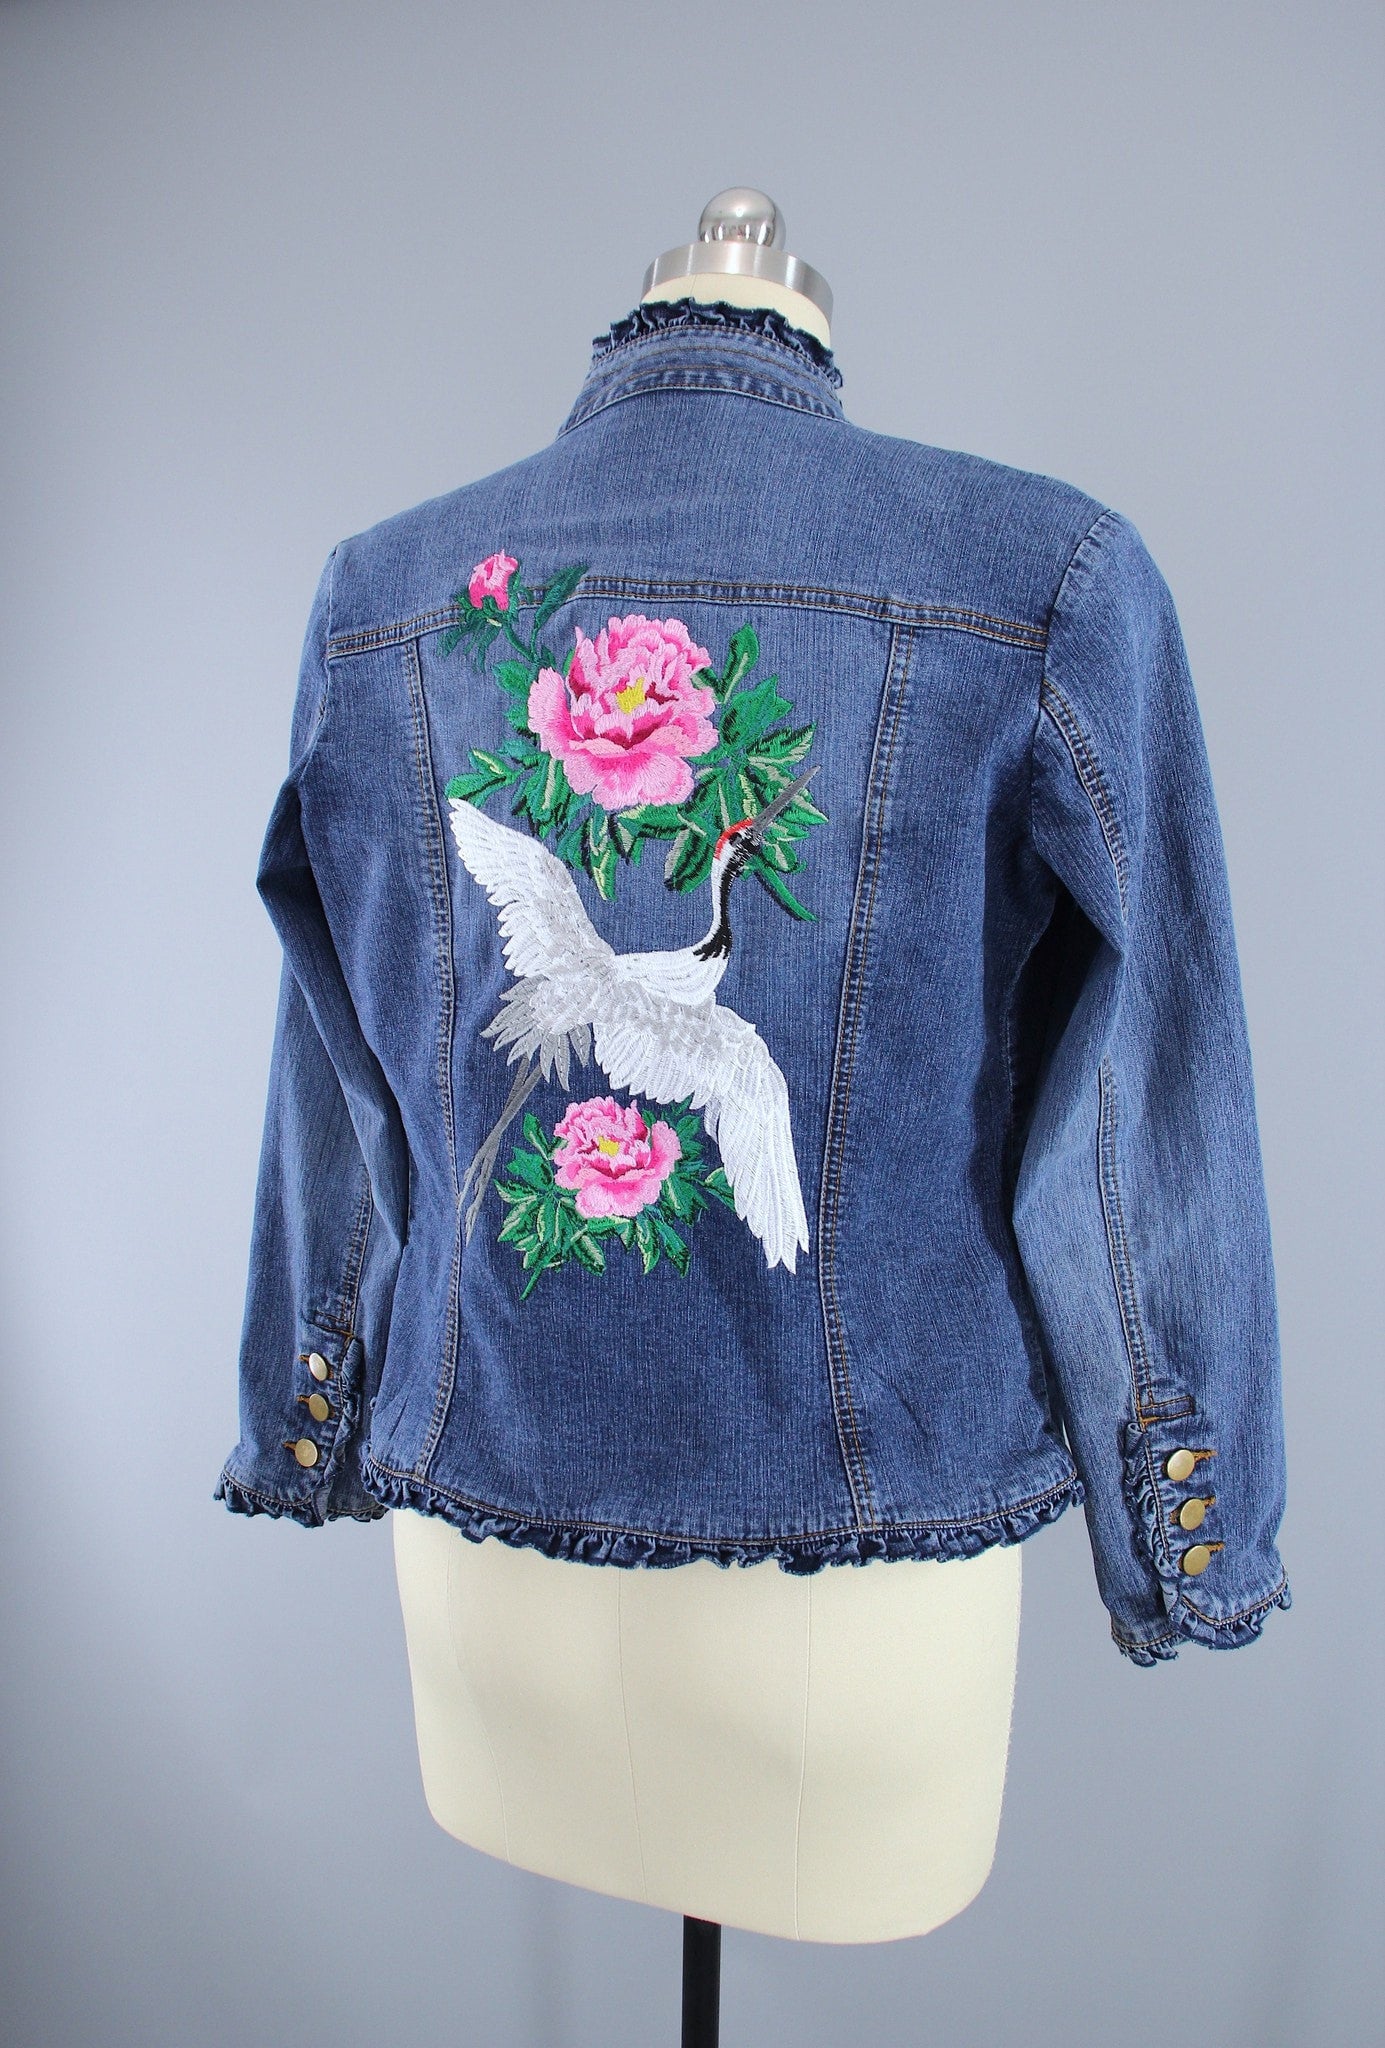 Embroidered Denim Jacket / Asian Crane Bird & Peony Floral Embroidery ...